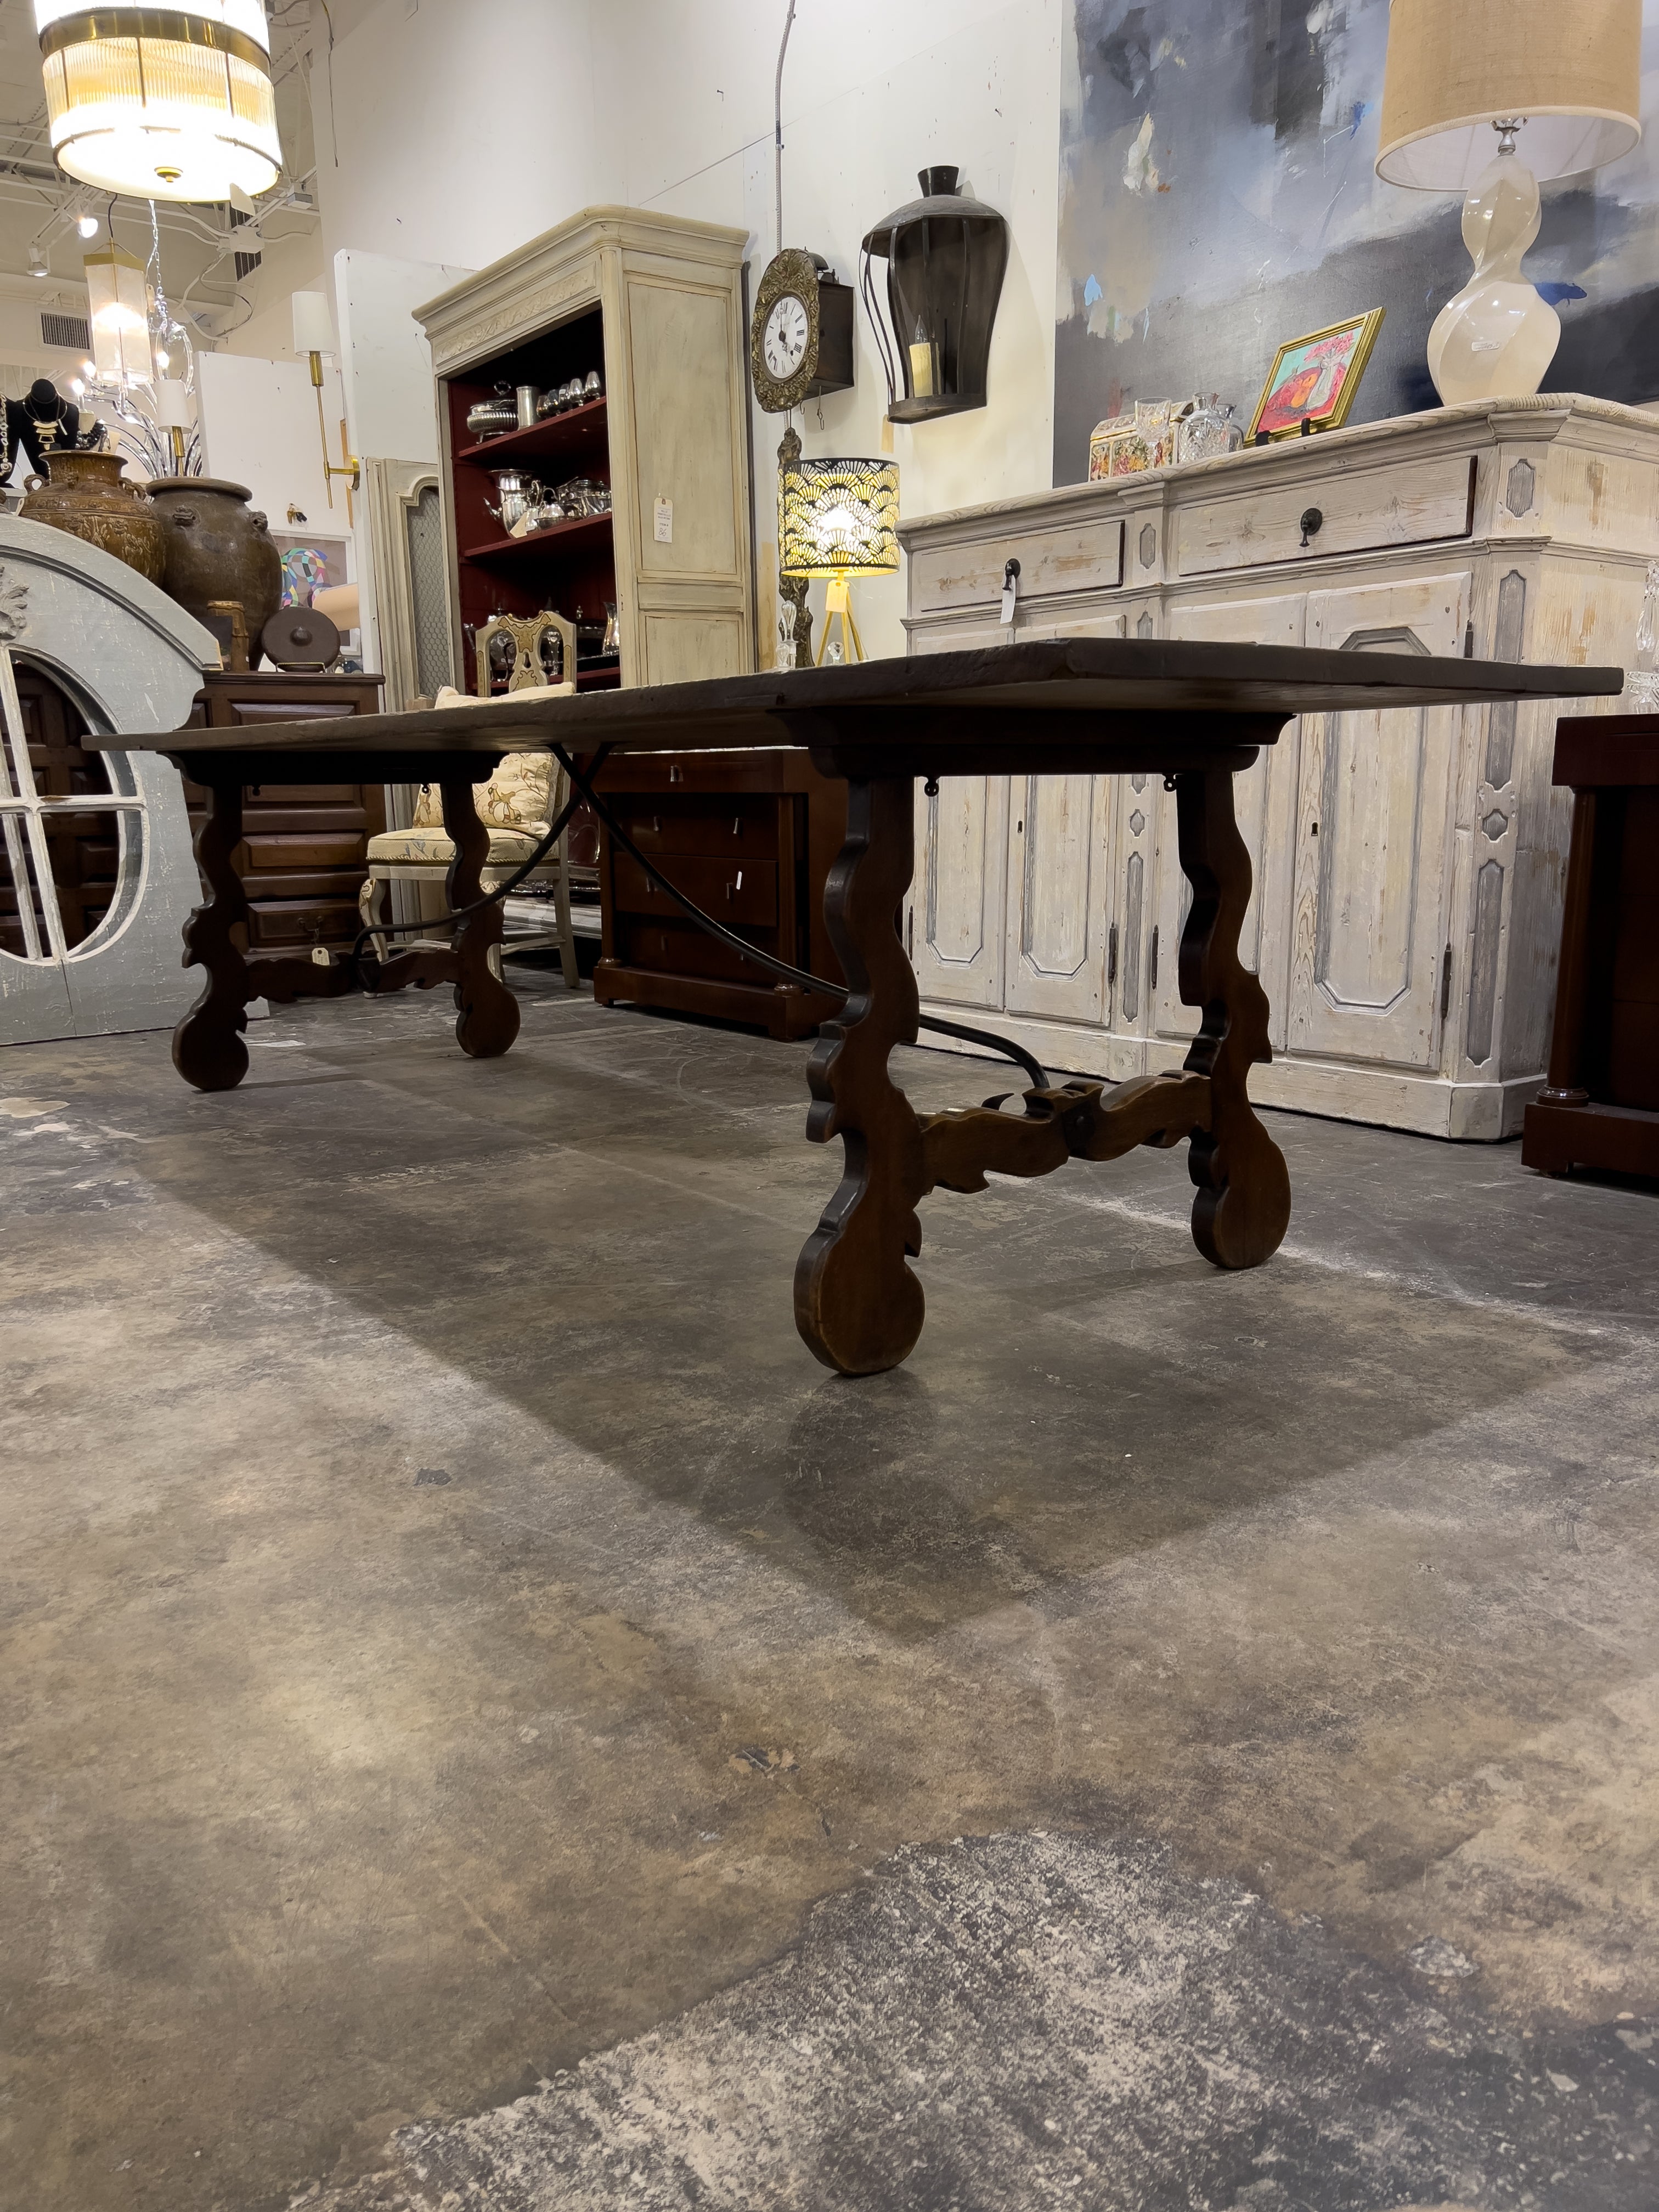 19th century Spanish trestle table with a shaped iron trestle and beautifully carved legs. The rectangular trestle table stands on two carved scrolled legs joined together with a forged metal stretcher. The elegant table is in good condition